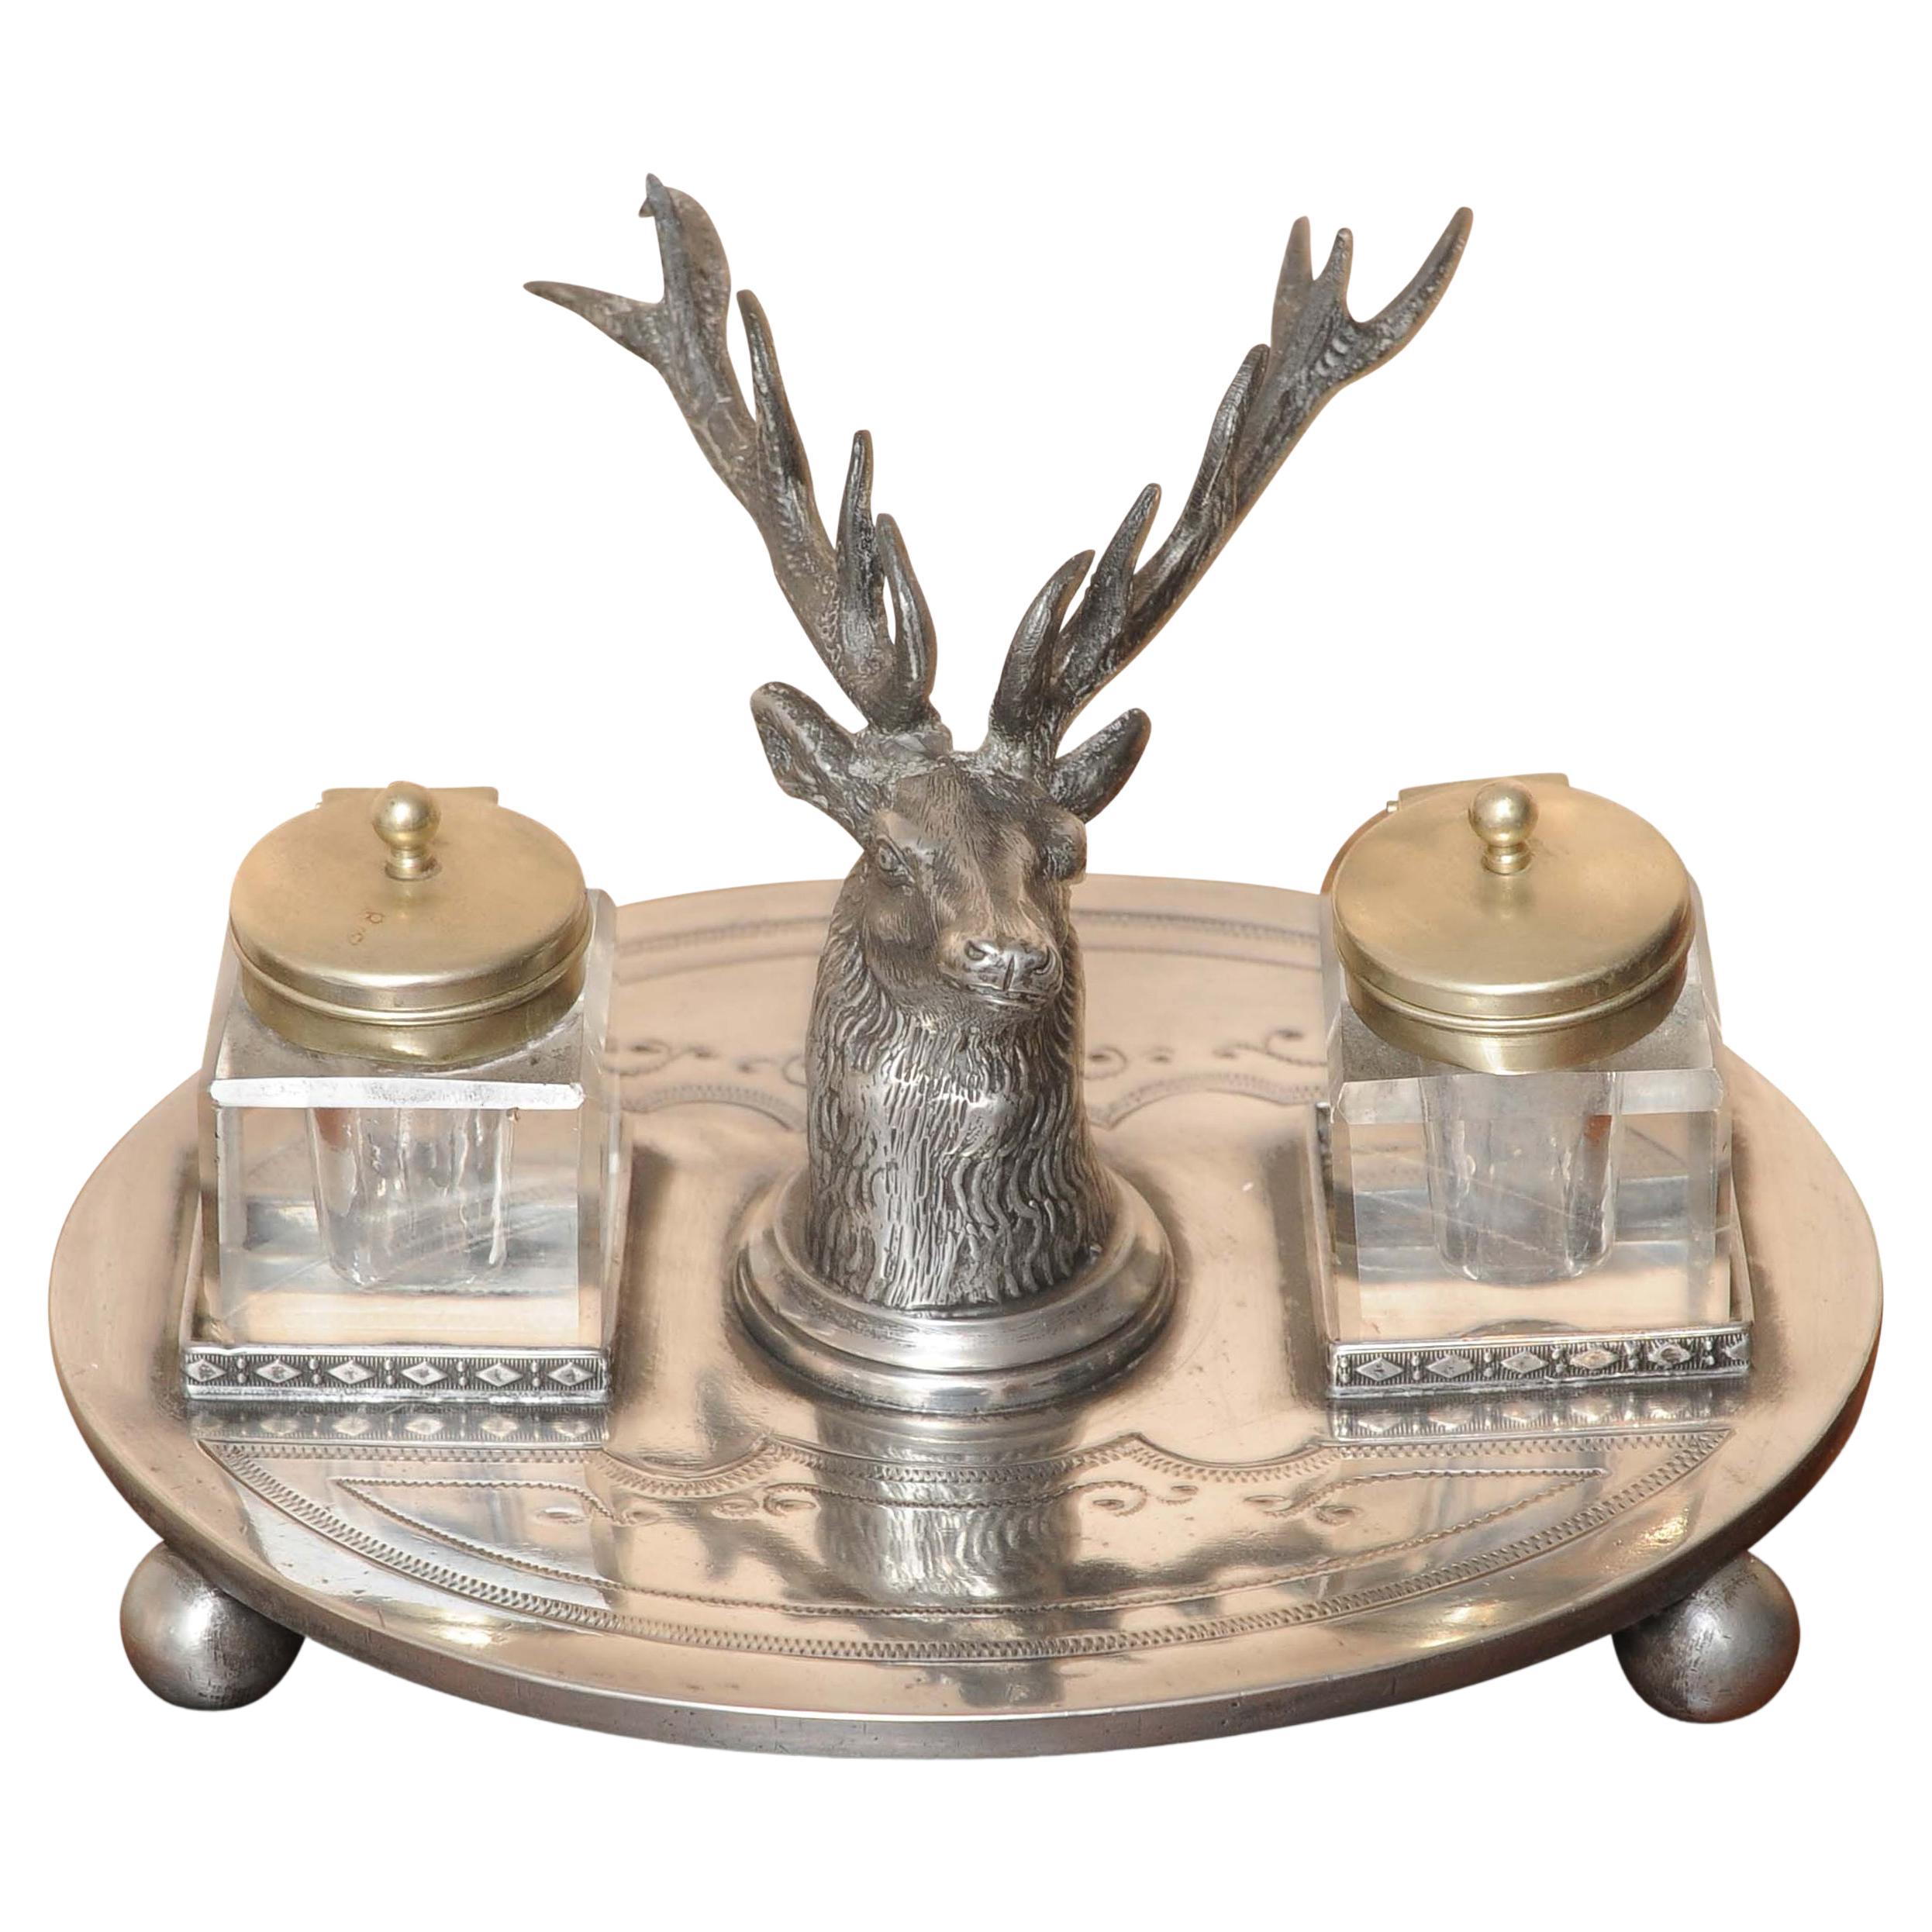 Rare Luxurious Silver Plated Stag's Head Ink Stand Desk Set Comprising of Pop Up Inkwells Art Nouveau by W W Harrison & Co Sheffield - 1800's

Befitting for any desk, Inkwells can be removed from their stands.

Stamped 5693 W W Harrison & Co